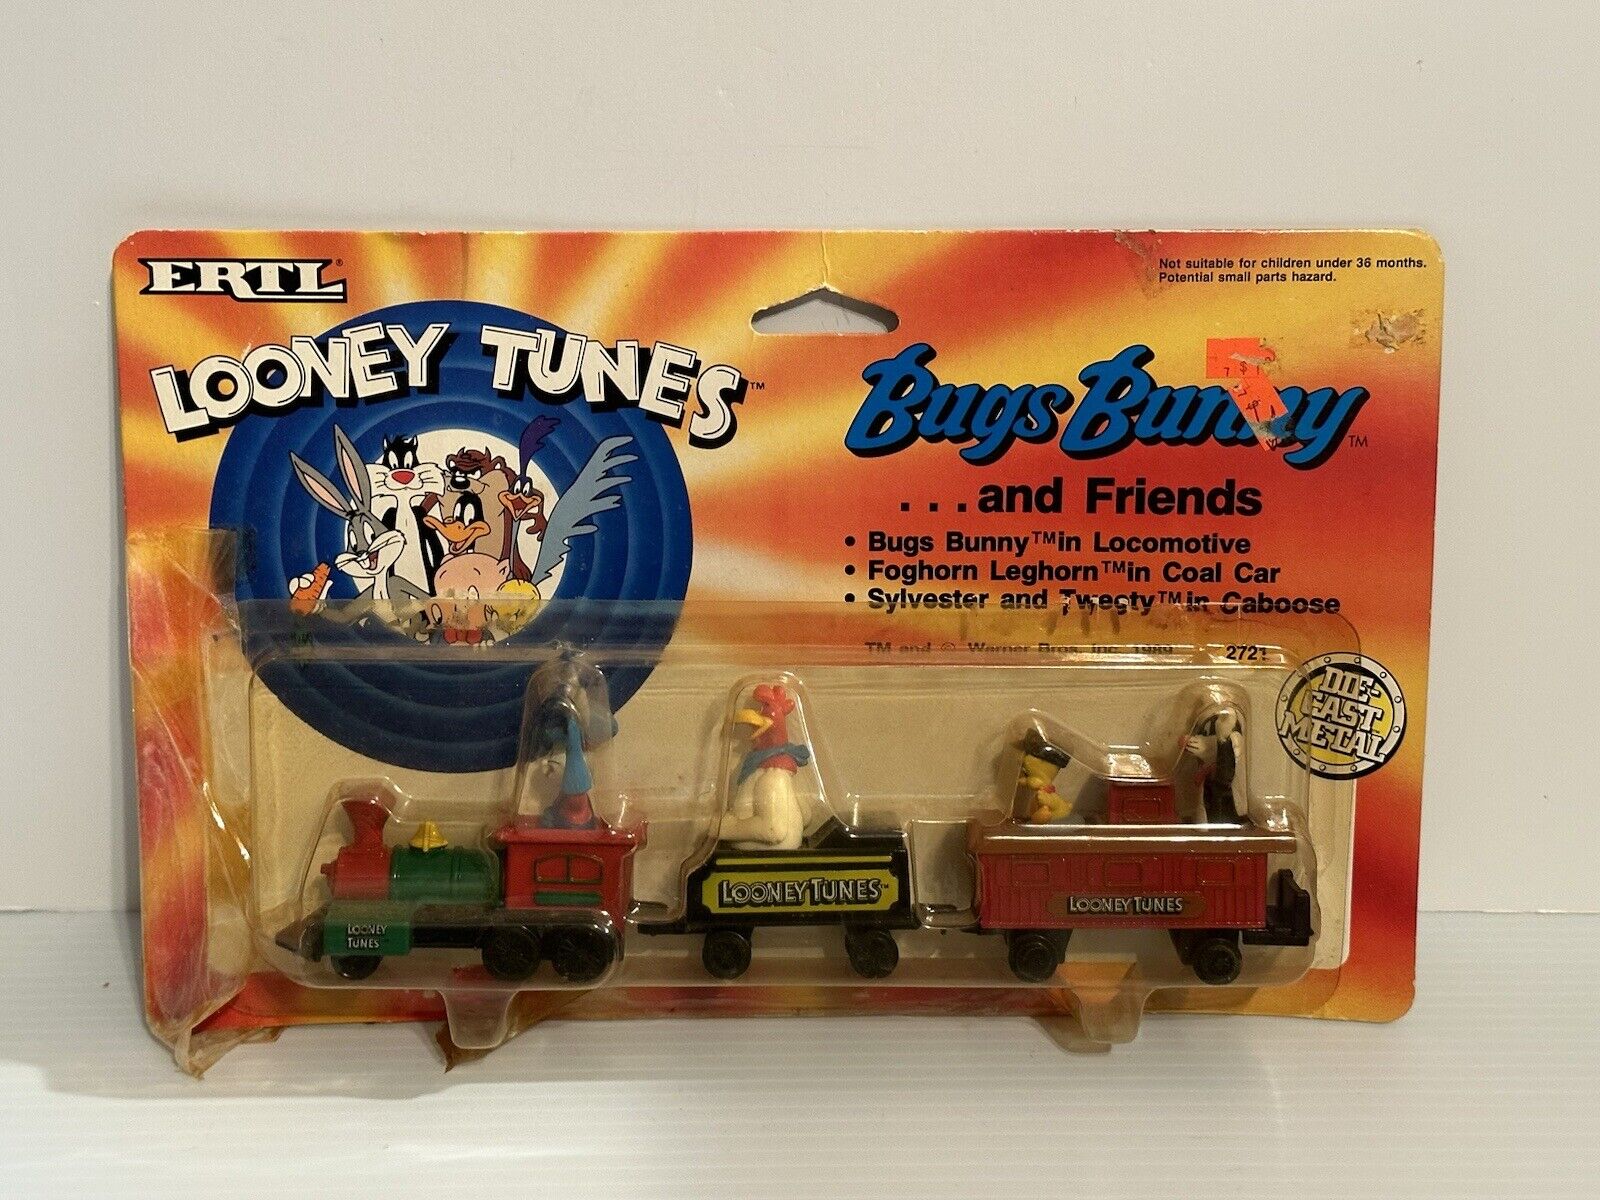 1989 ERTL Looney Tunes Bugs Bunny And Friends Die Cast Toy Train Set Taped Seals